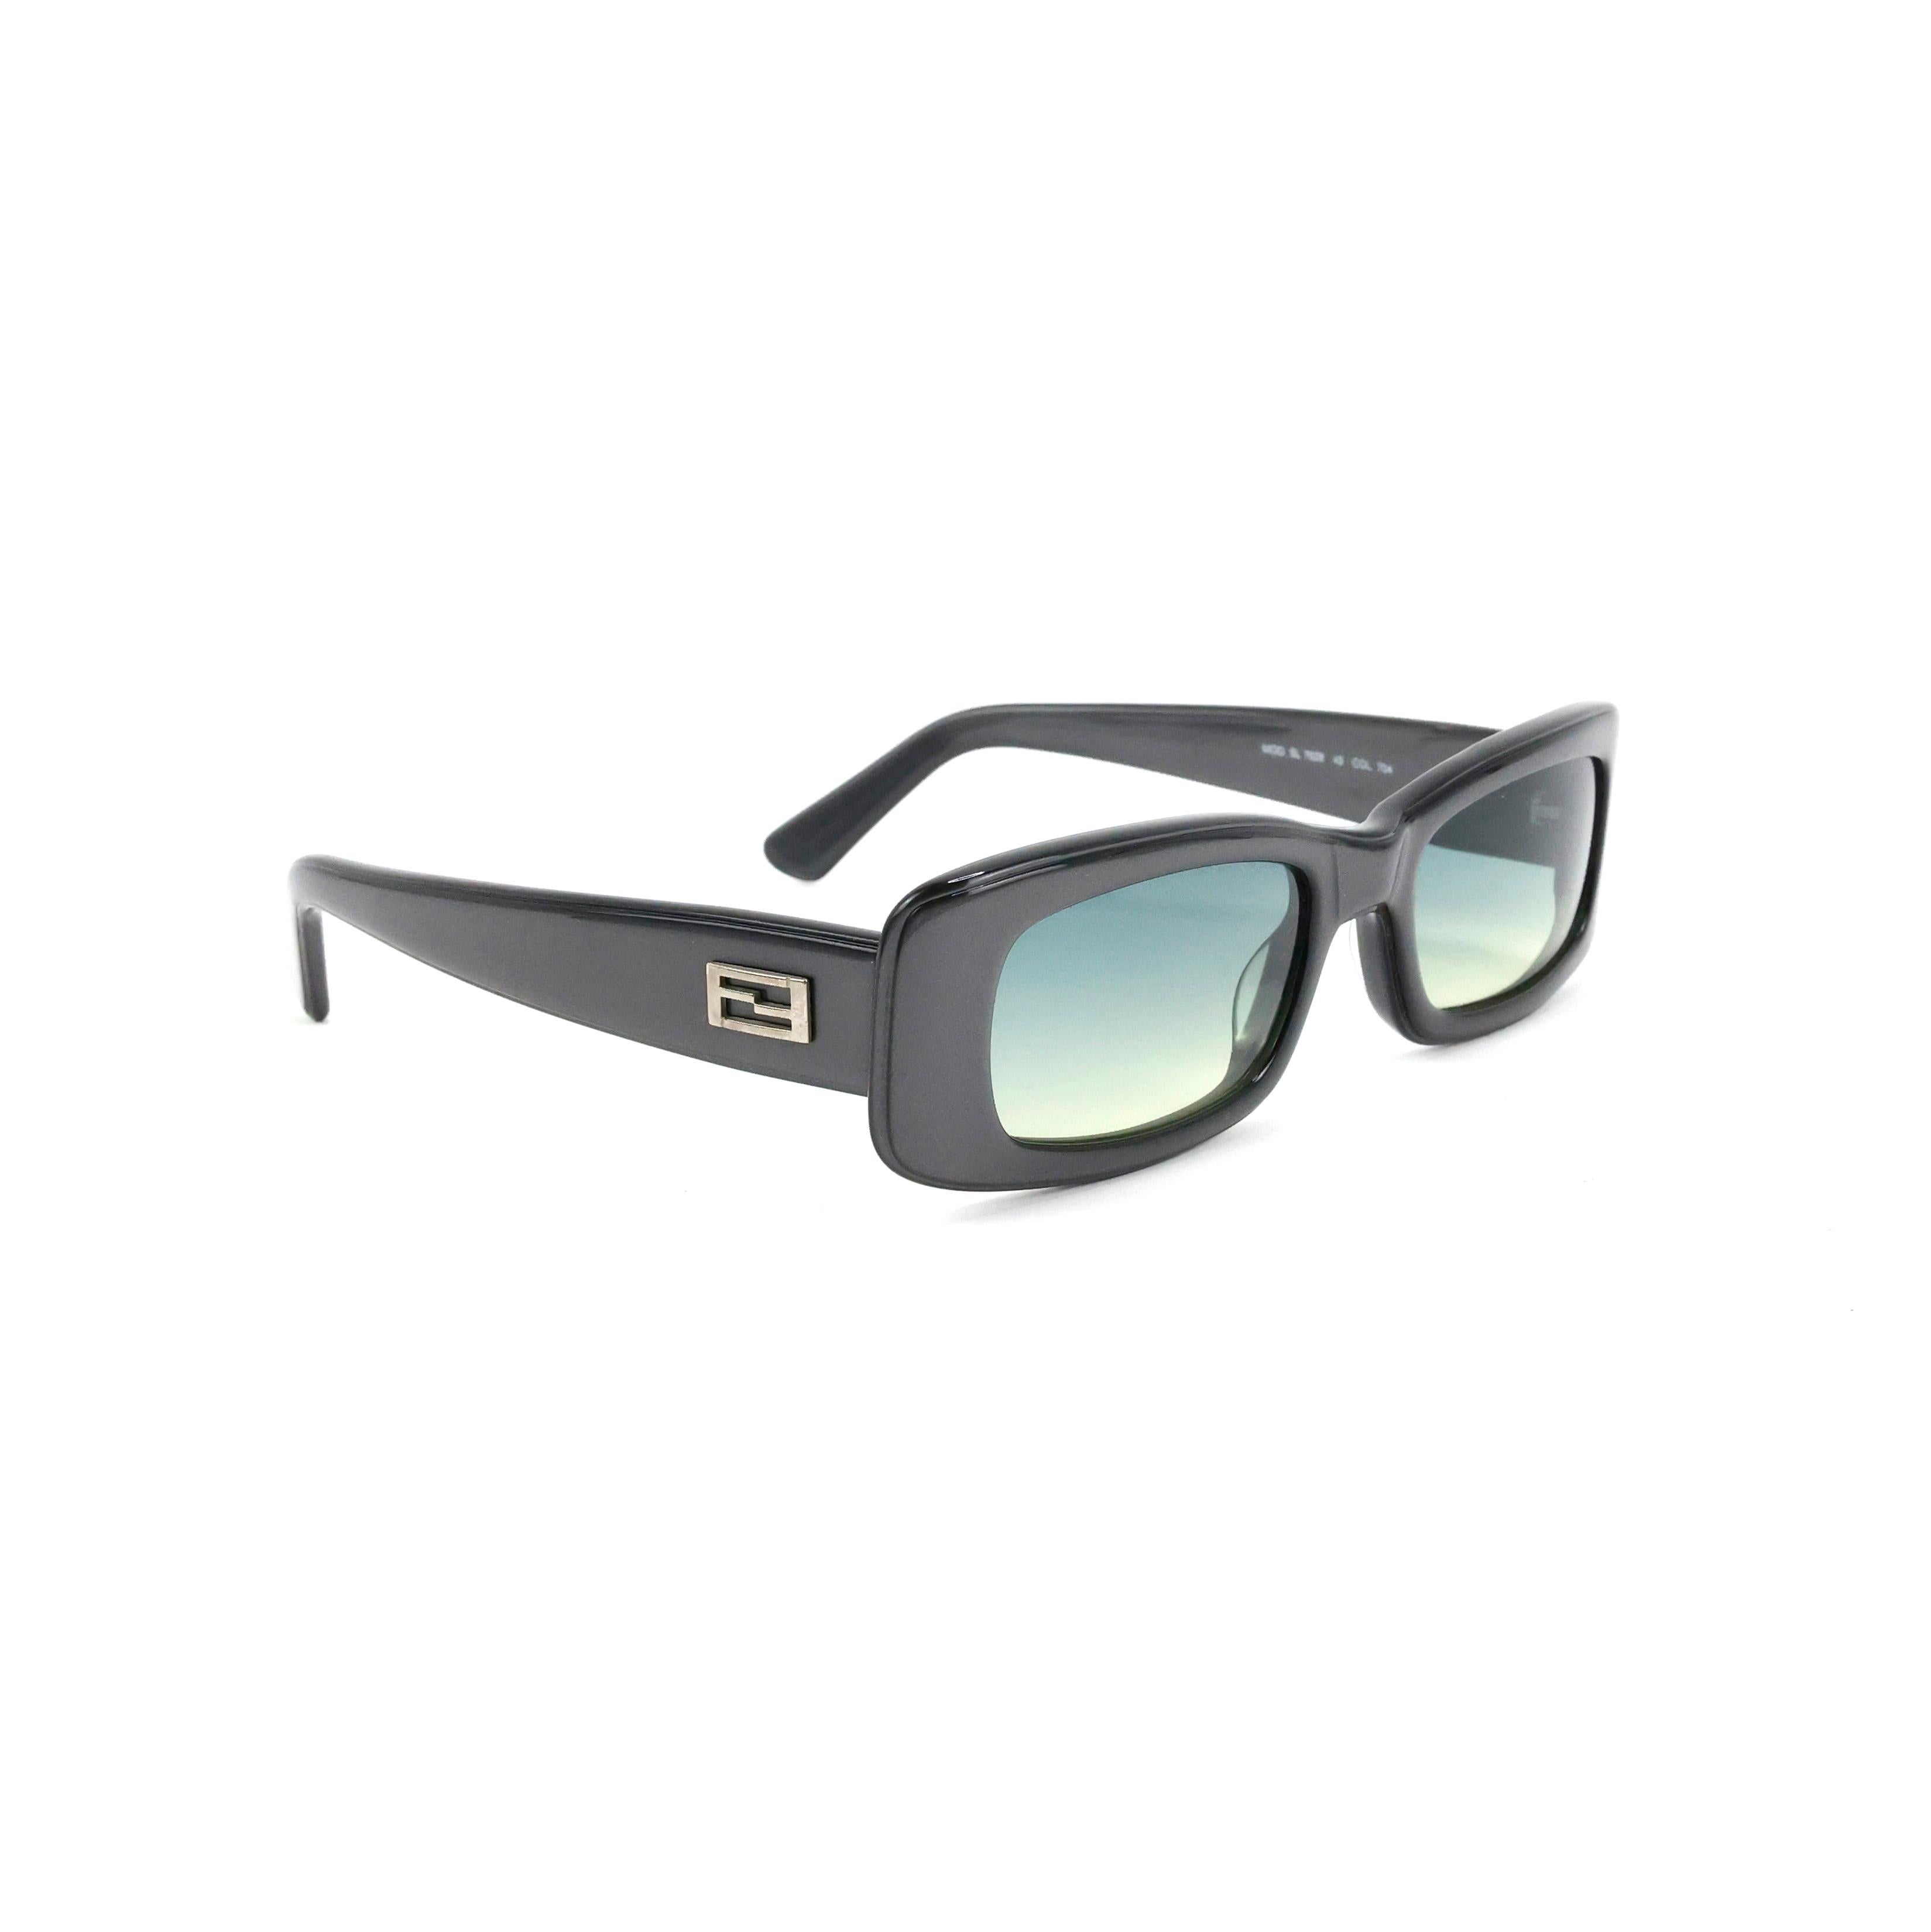 Fendi sunglasses color grey with light lens. 


Condition:
Really good. To note: slight scratches on lens, not noticeable when worn.
